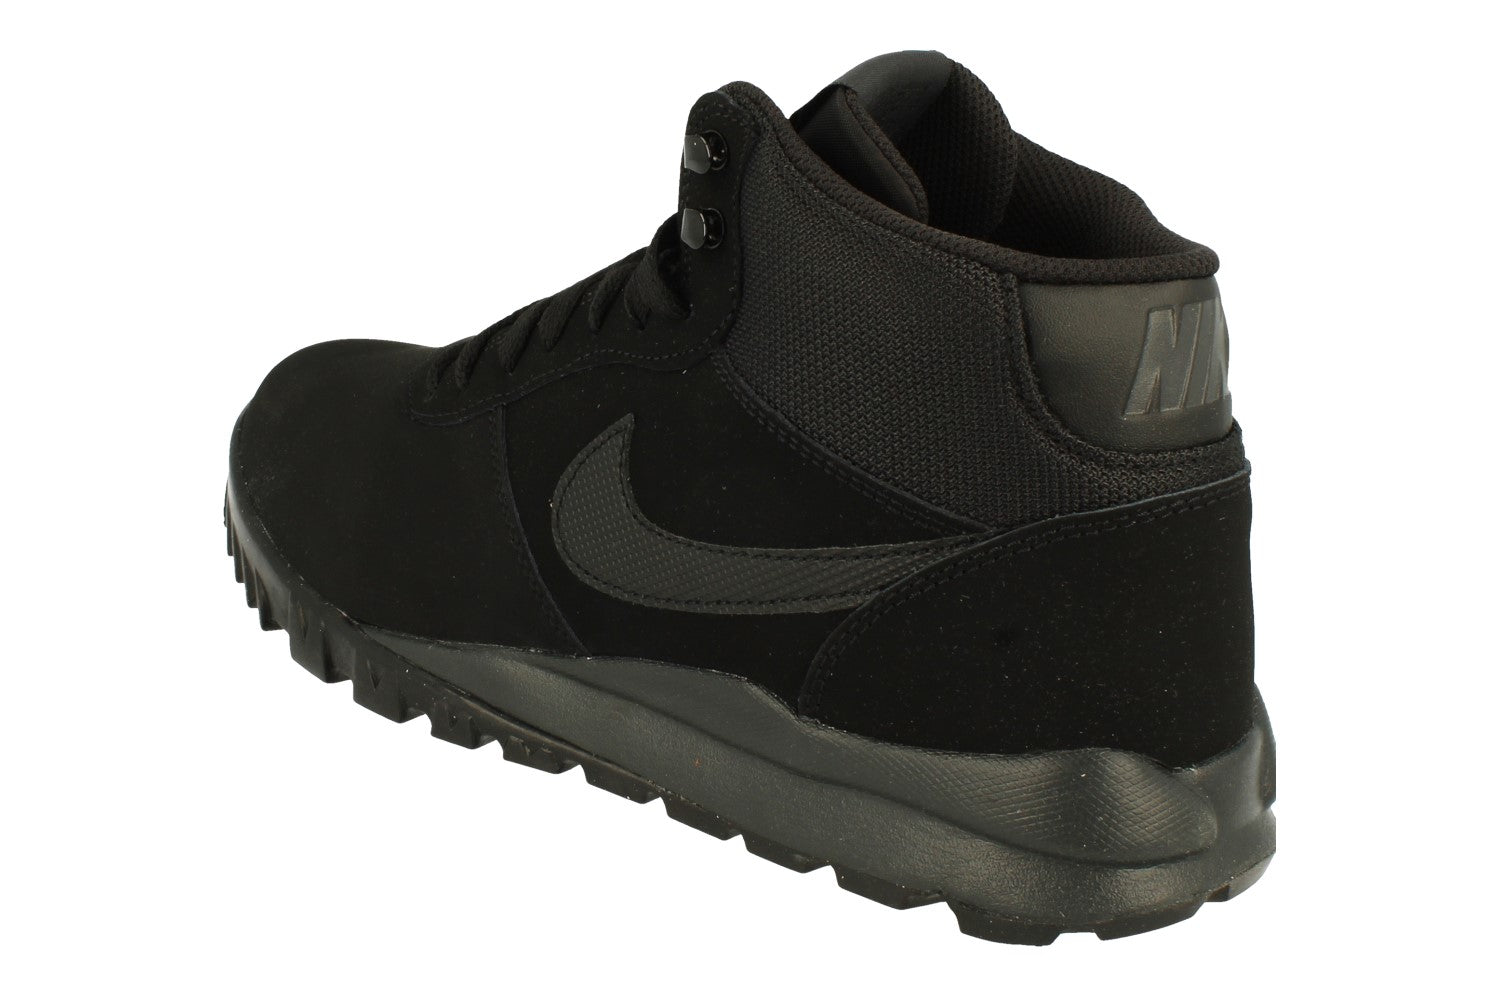 Nike Hoodland Suede Mens Trainers 654888 Boots (uk 10 us 11 eu 45, black anthracite 090) 090 - Free Delivery - Super Fast EURO & USA Delivery! – KicksWorldwide